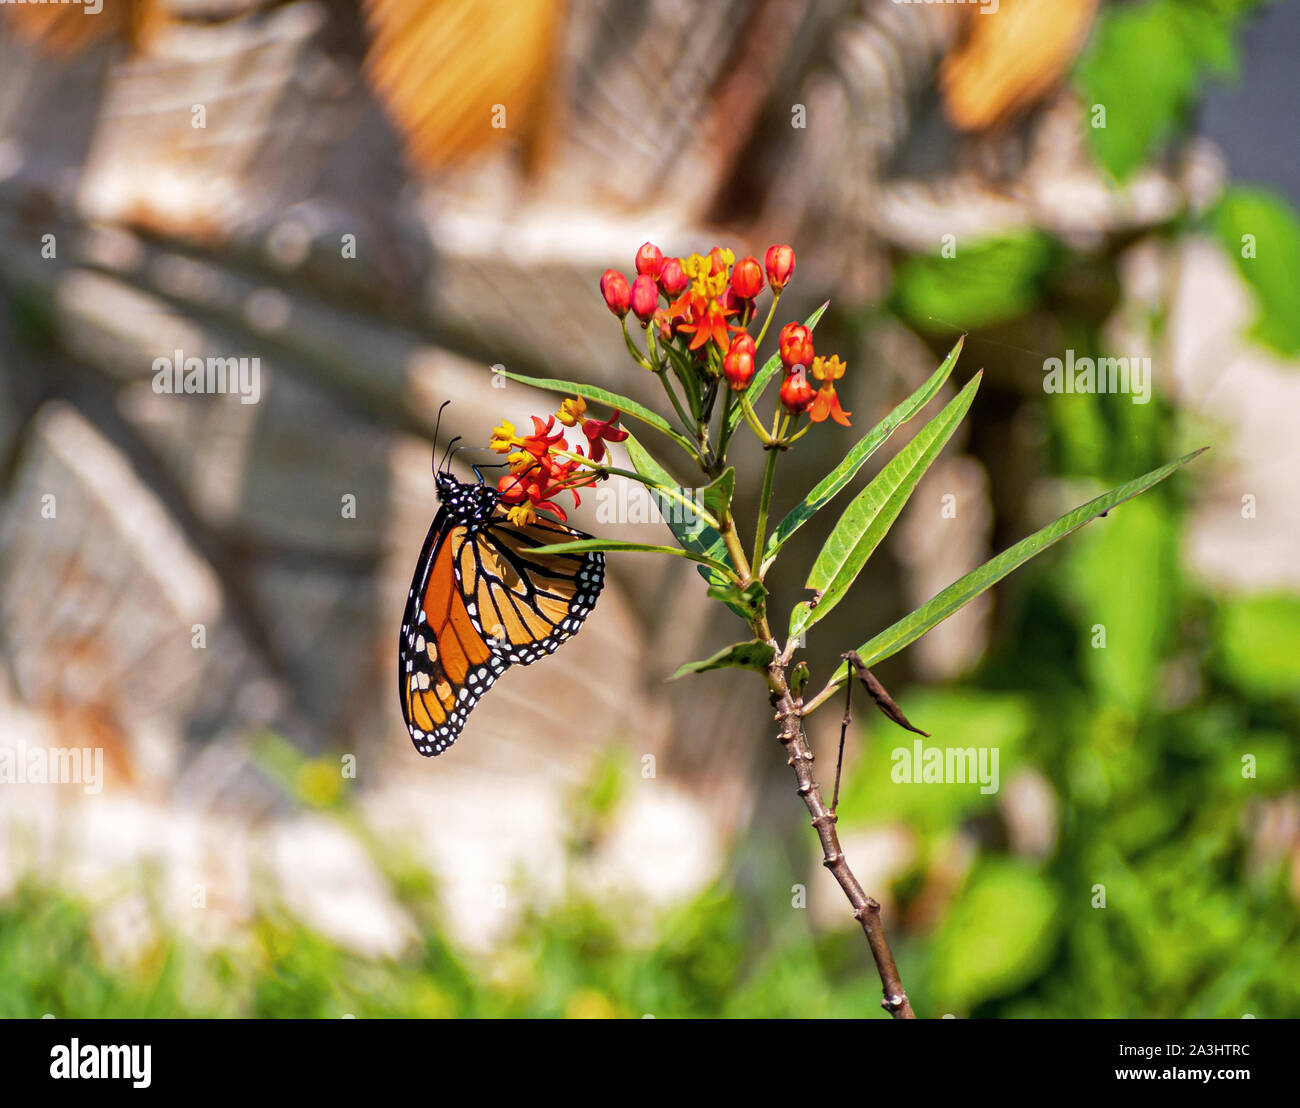 Monarch butterfly, Danaus plexippus, perched on a milkweed plant. Stock Photo